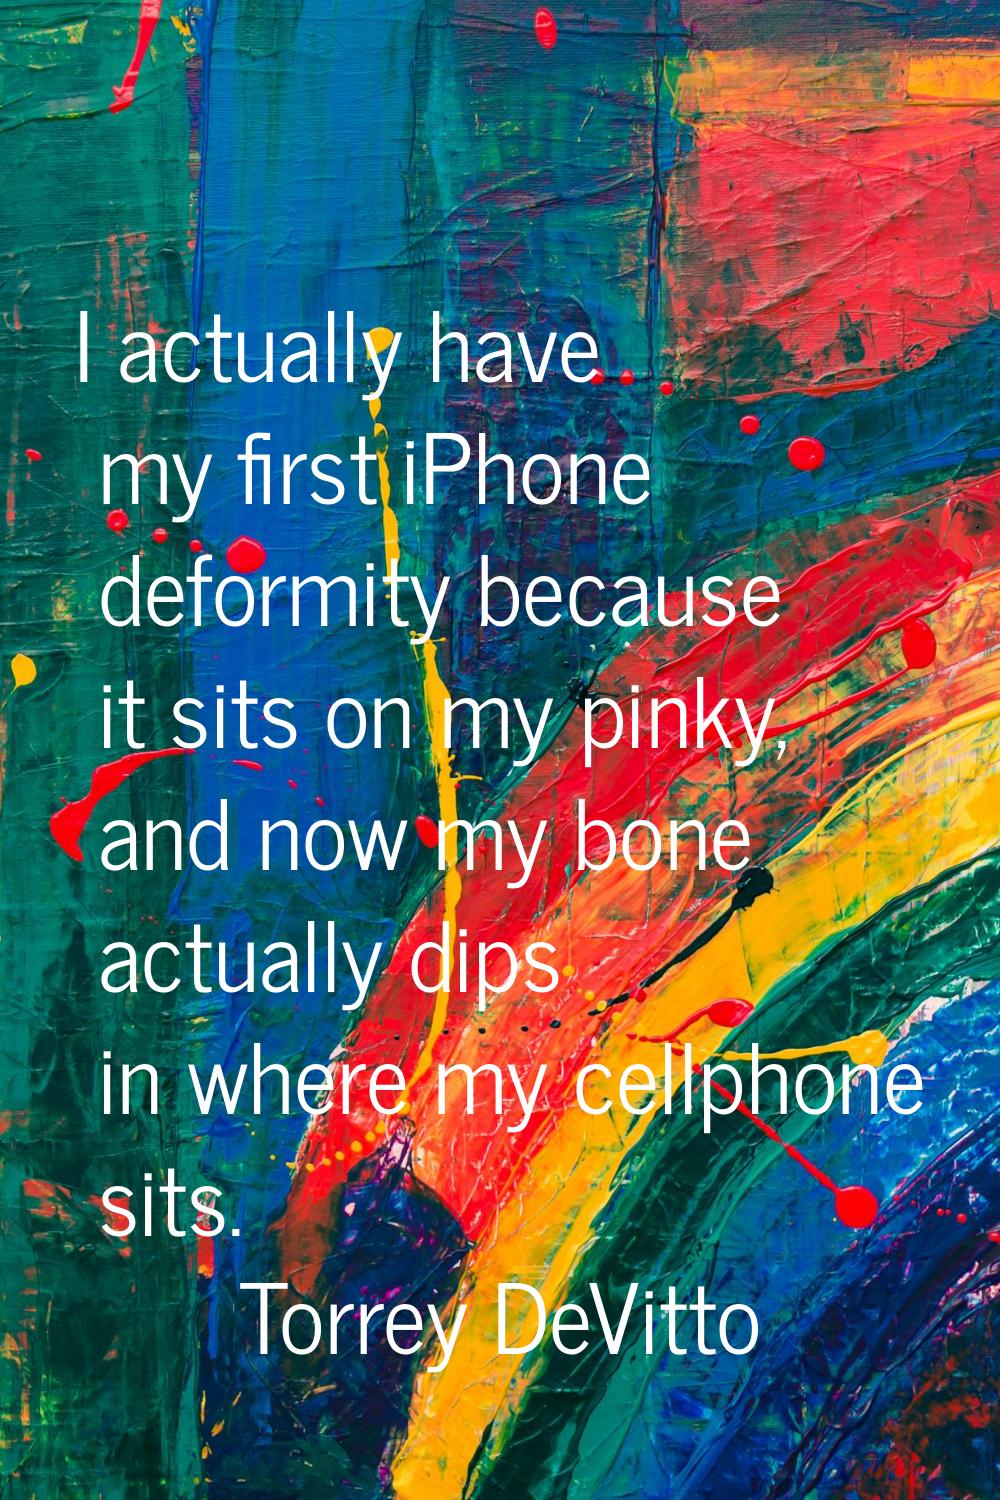 I actually have my first iPhone deformity because it sits on my pinky, and now my bone actually dip